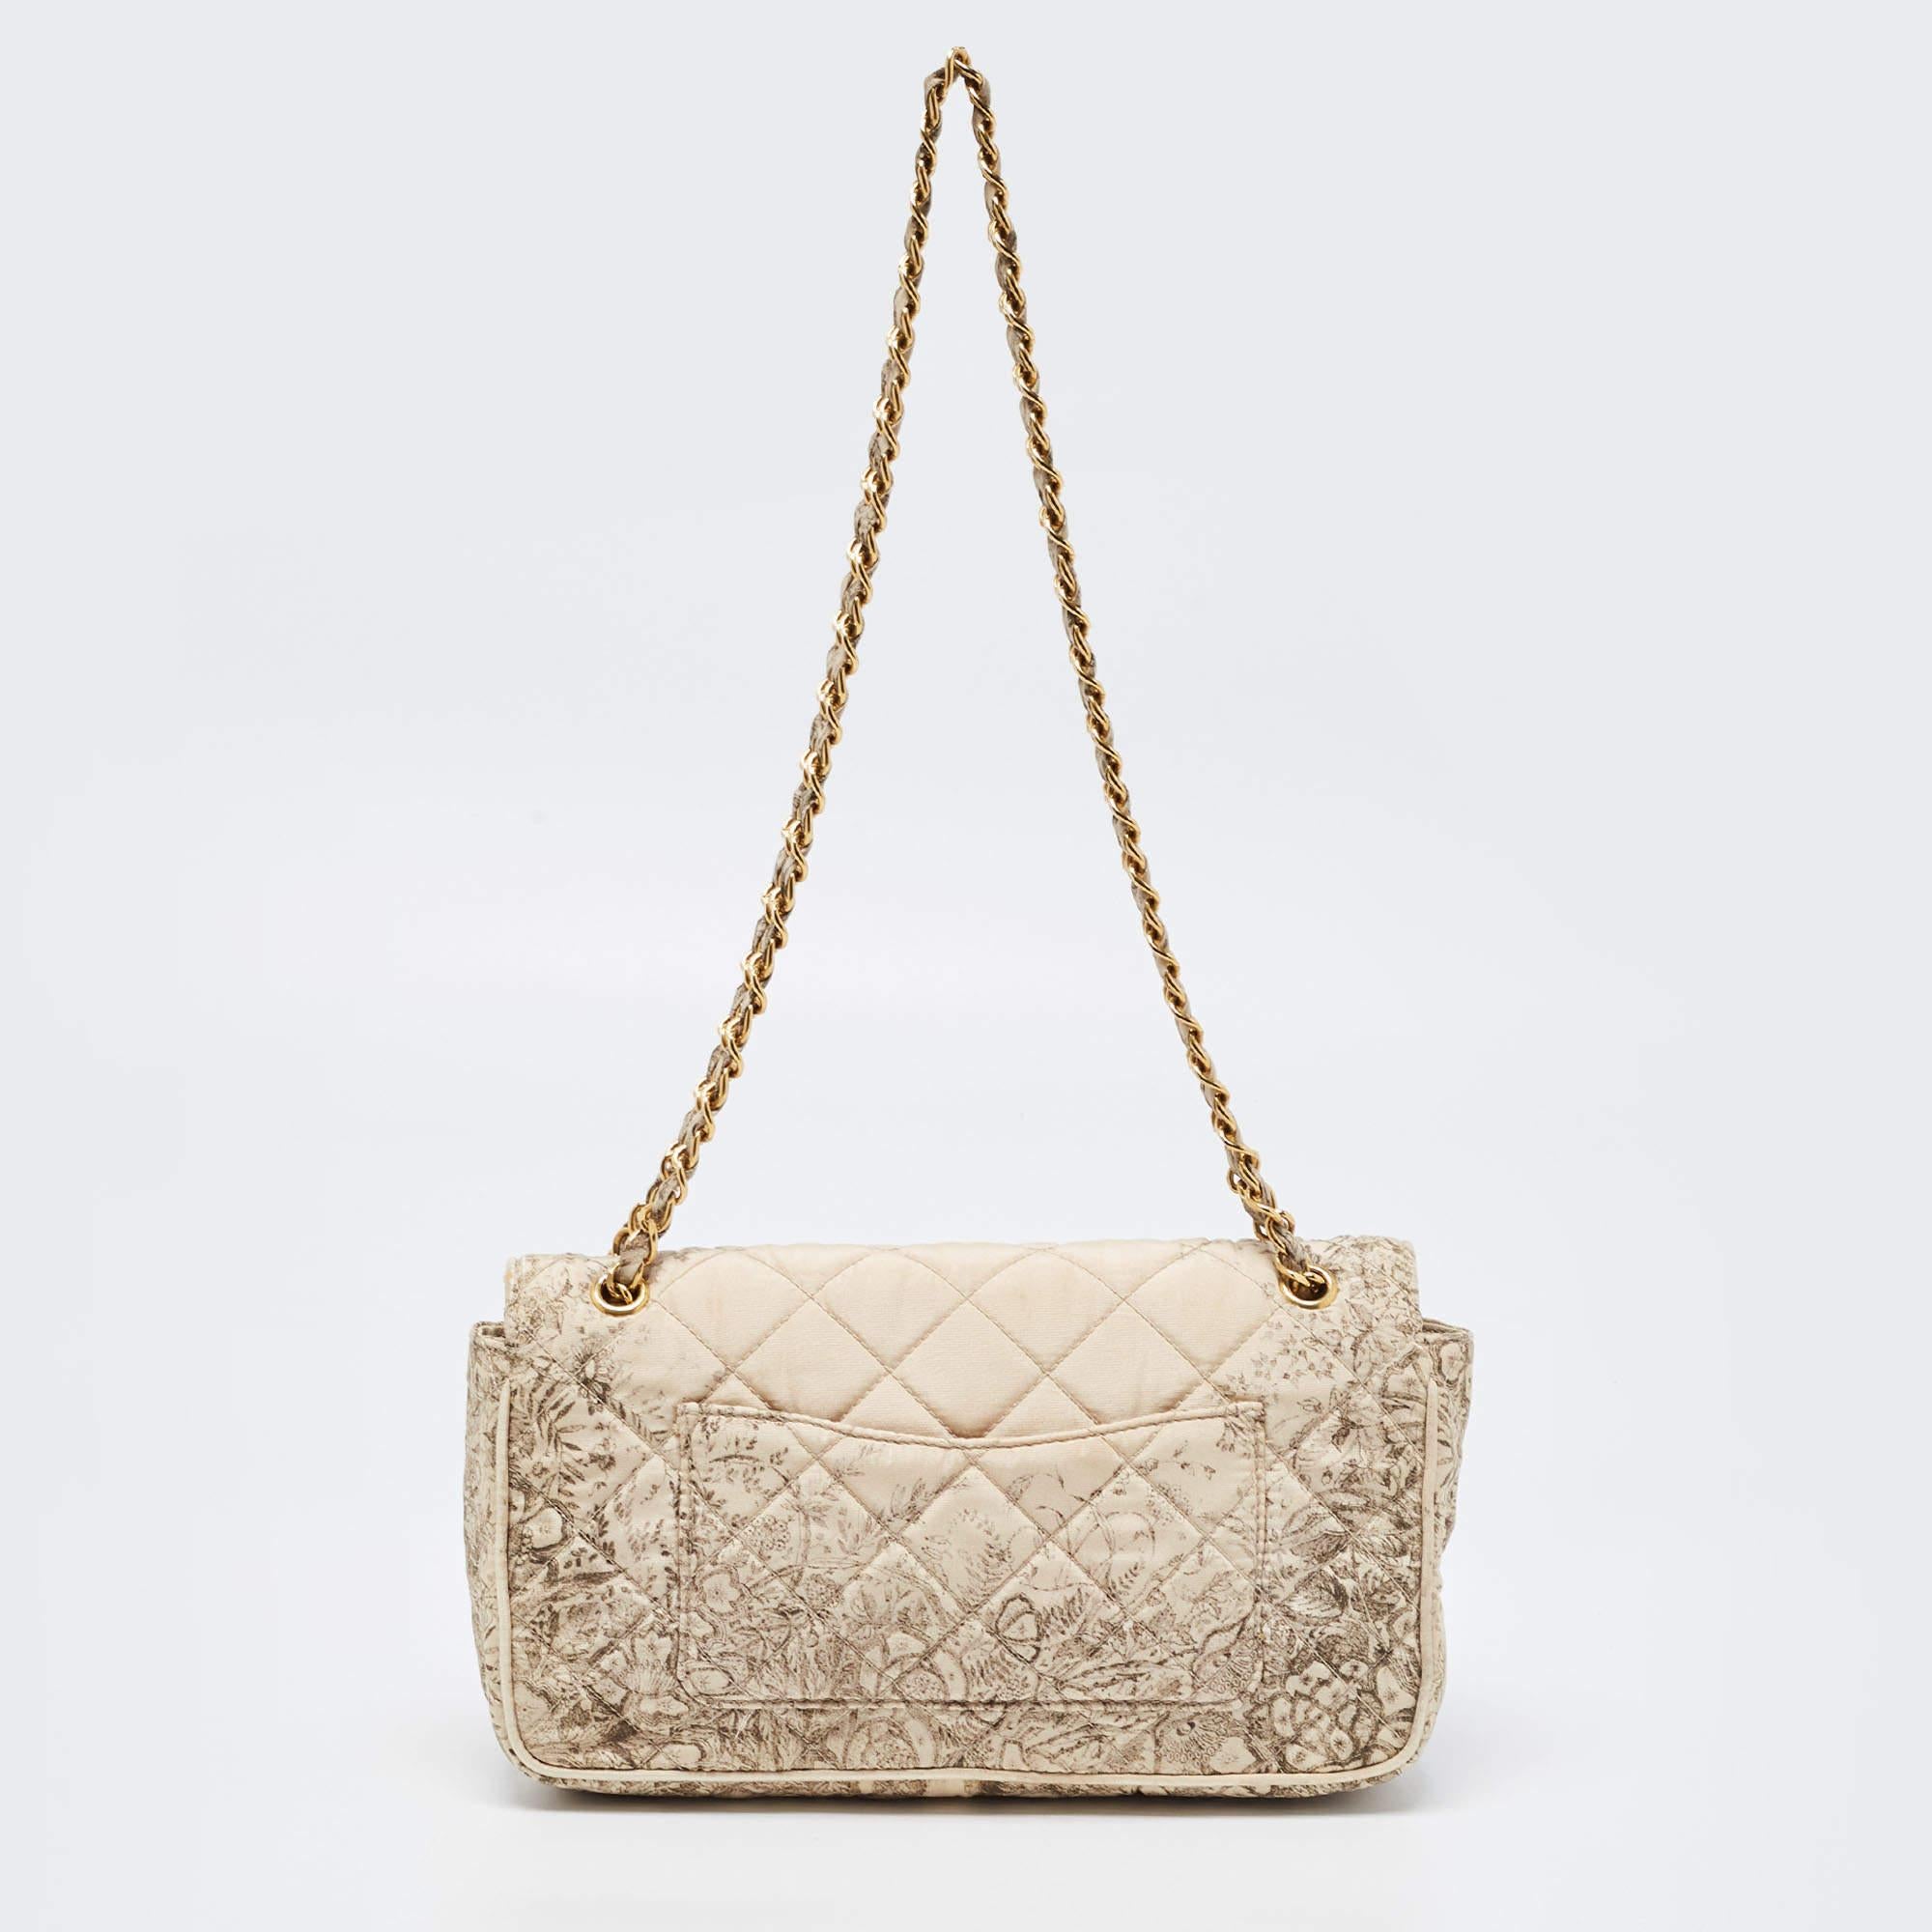 If you are looking for a bag with a blend of modern style and class, this Prada creation is the answer. Crafted from quilted satin, this beige piece comes with a chain link and a flap to secure the well-sized interior. It will surely make a prized